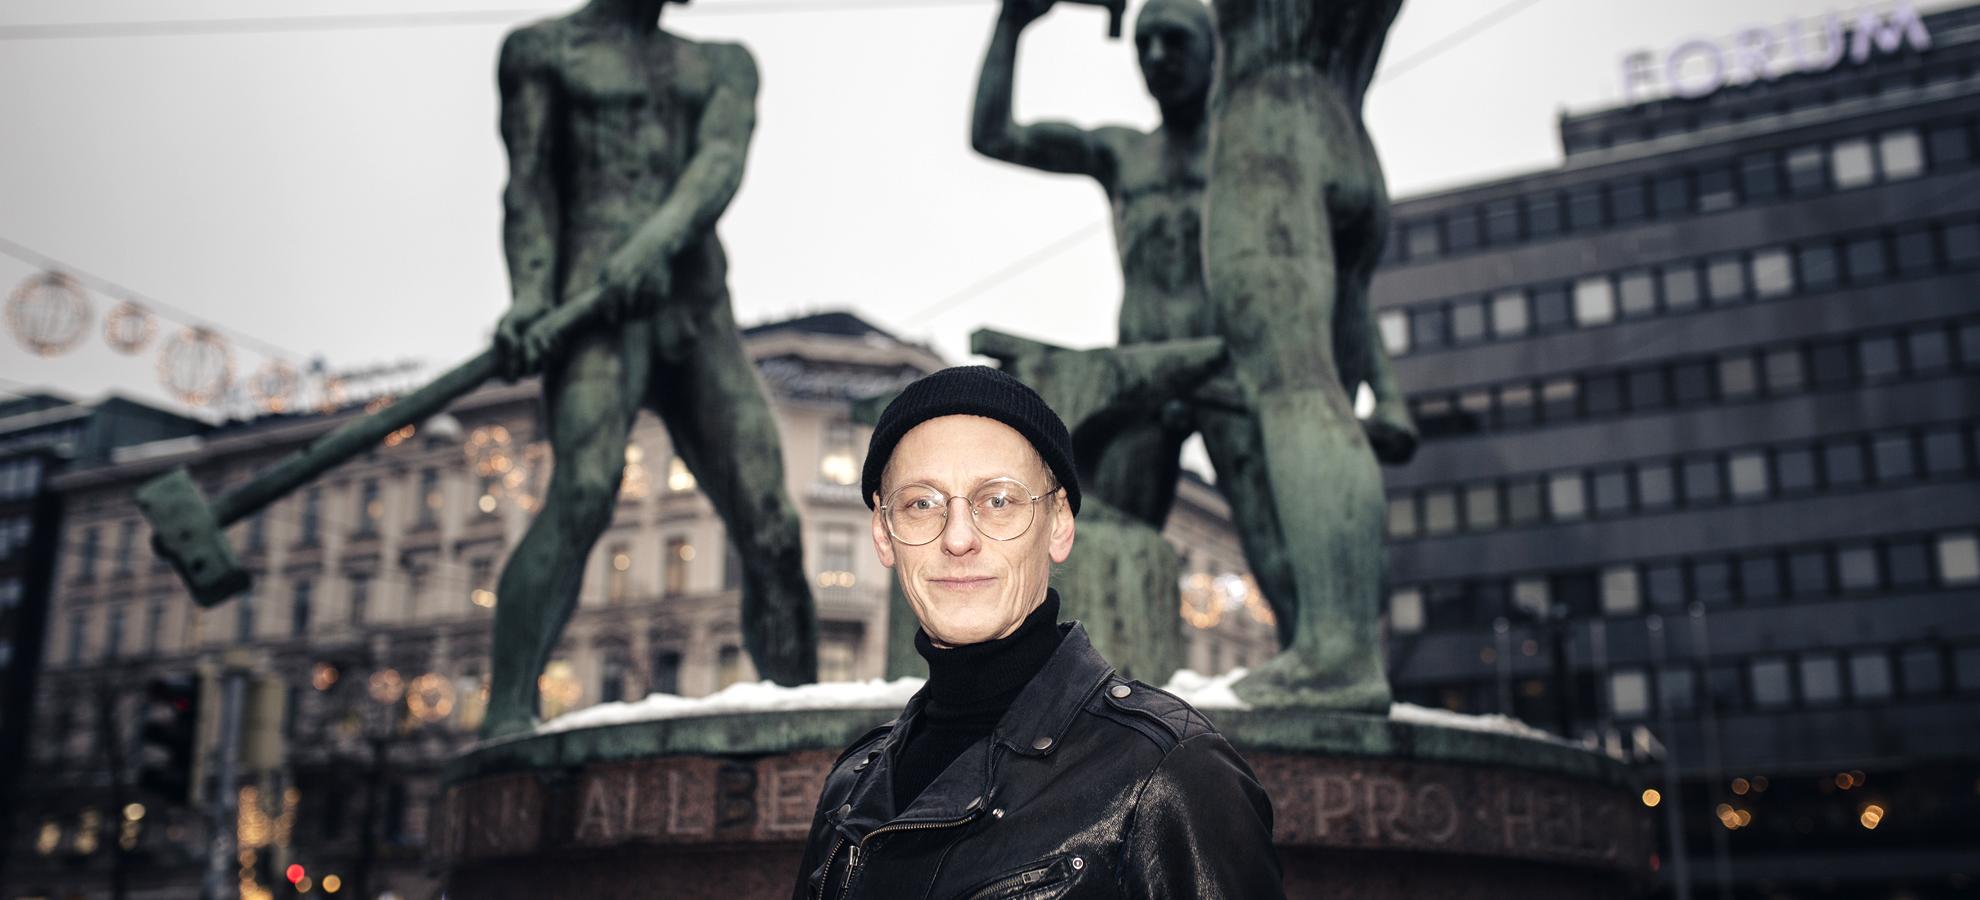 A man with eyeglasses and black beanie and leather jacket standing in front of a statue